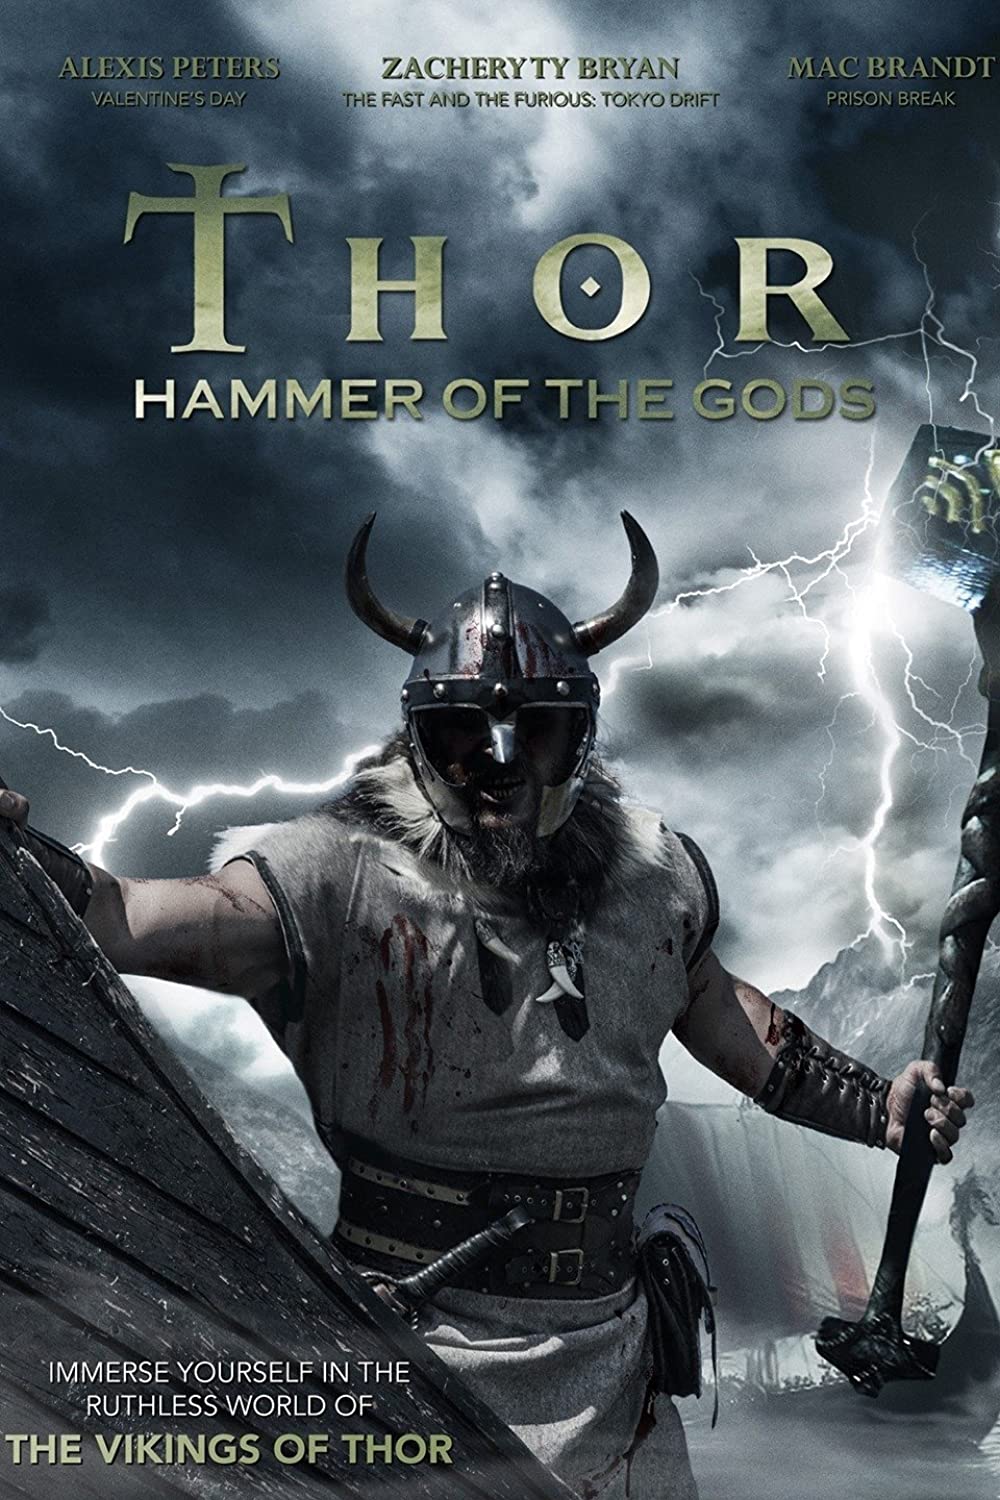 Download Hammer of the Gods Movie | Hammer Of The Gods Movie Online